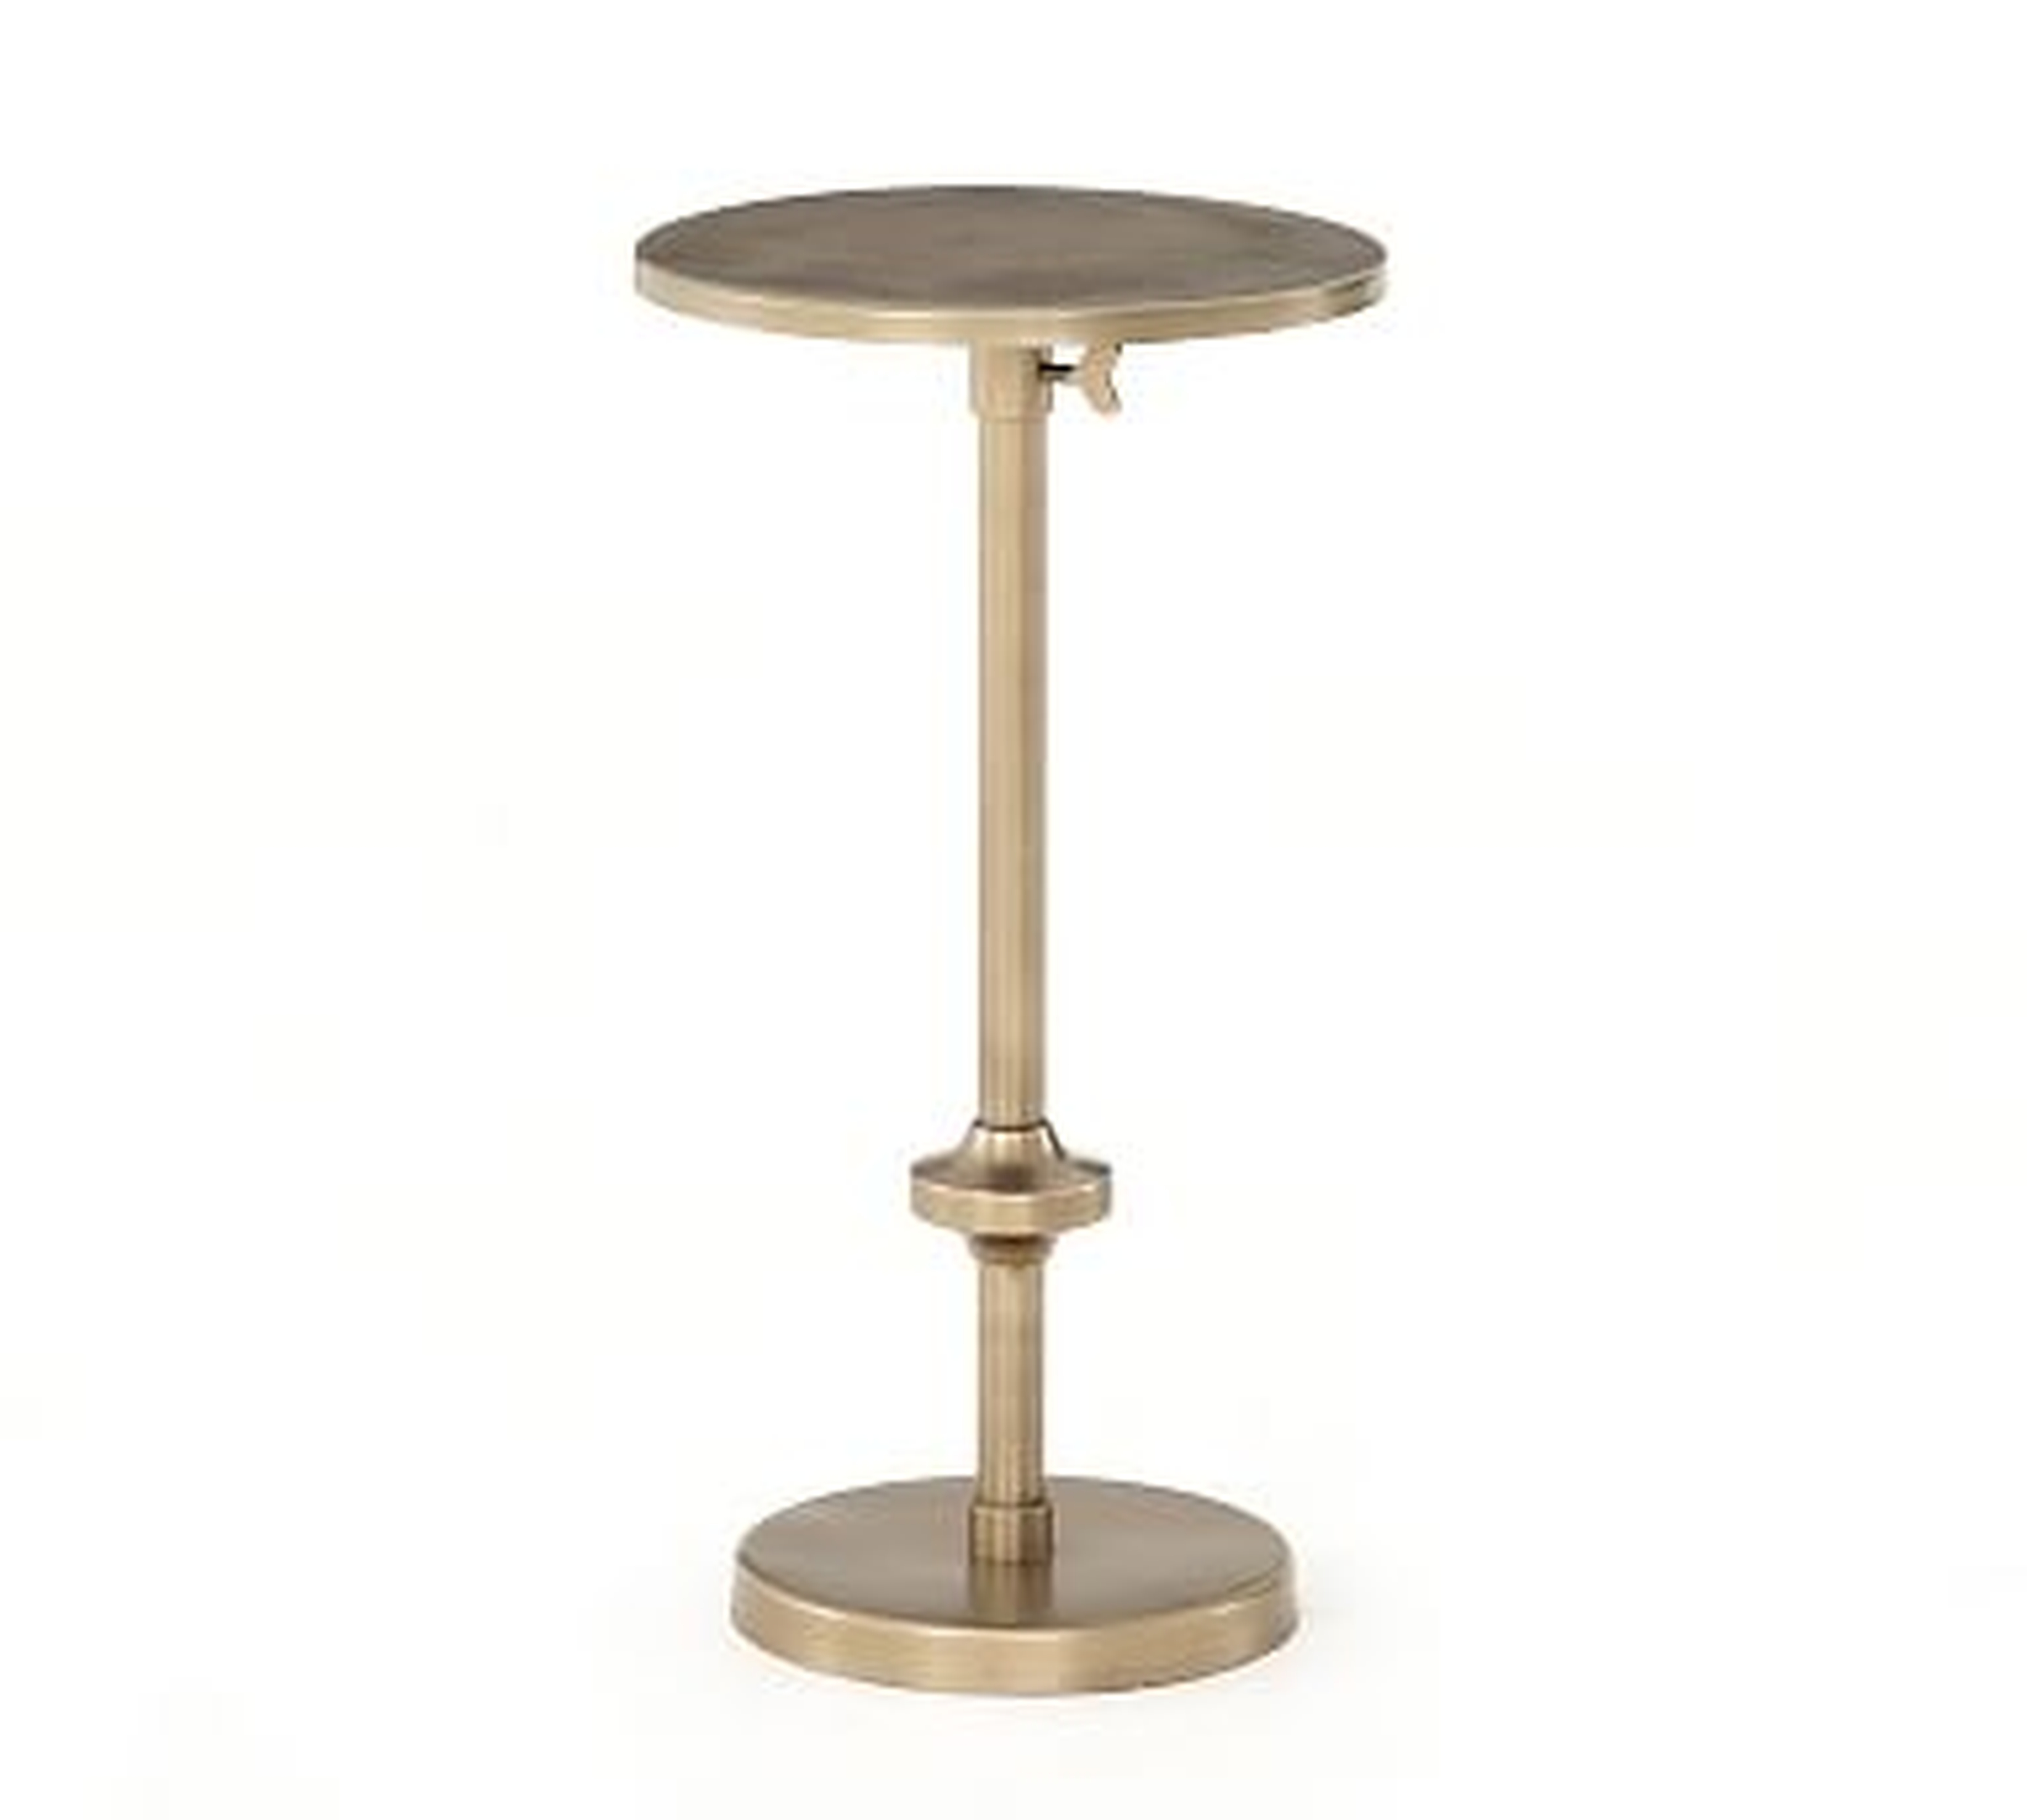 Hale Adjustable Accent Table, Brass - Pottery Barn